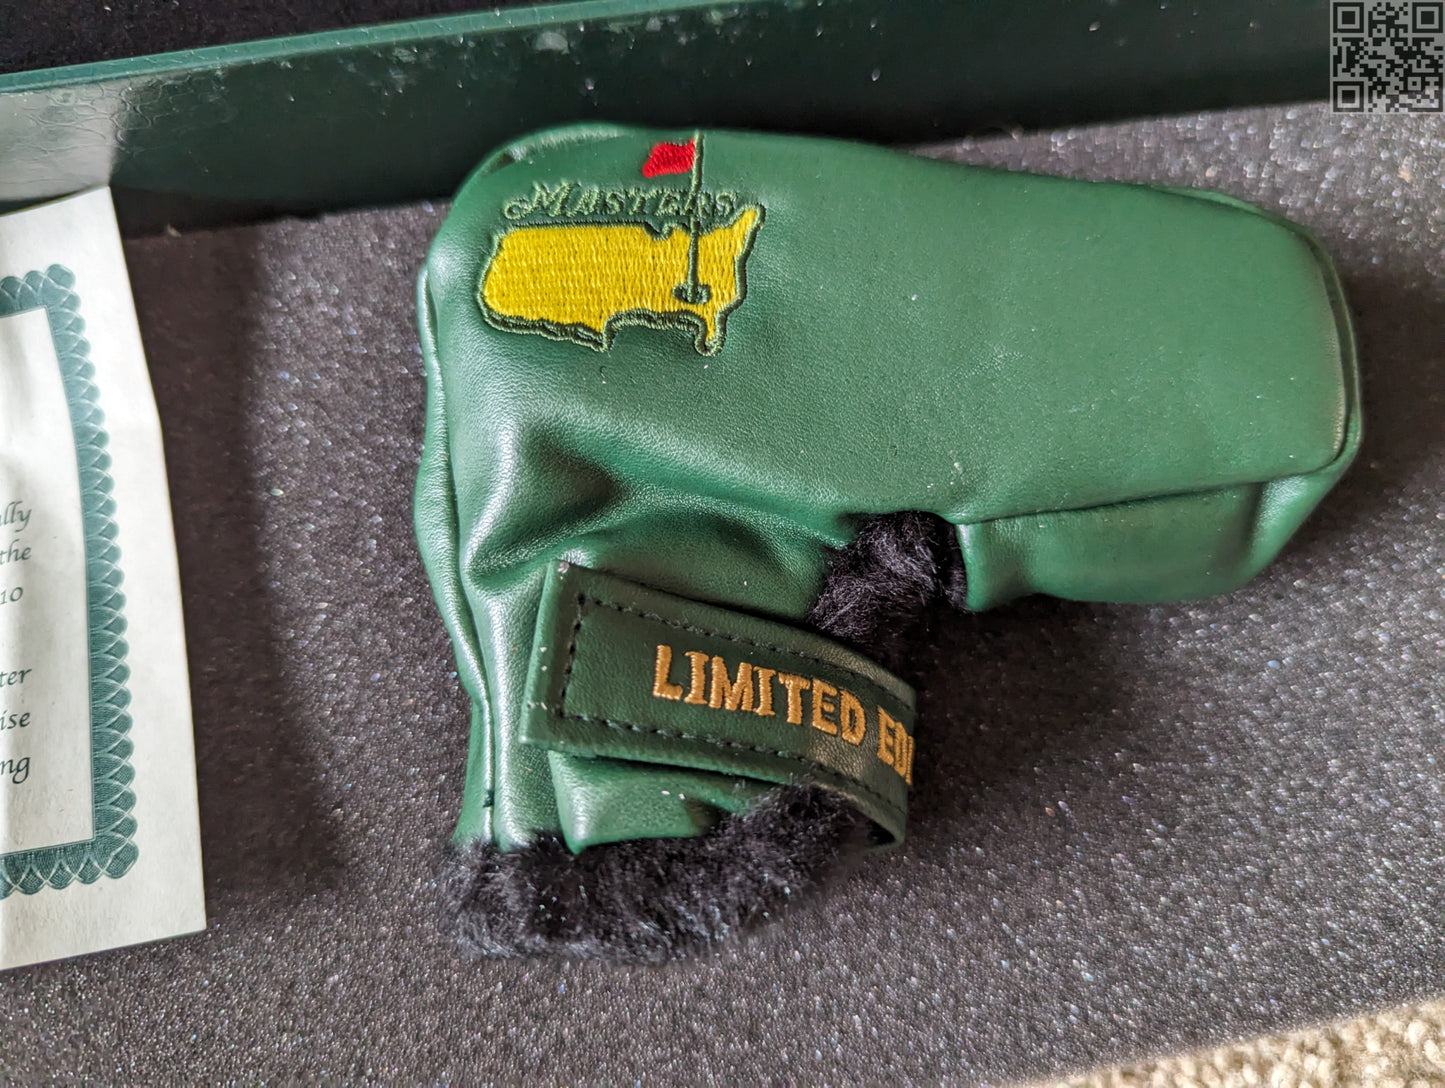 2010 Masters Tournament Limited Edition Putter 350